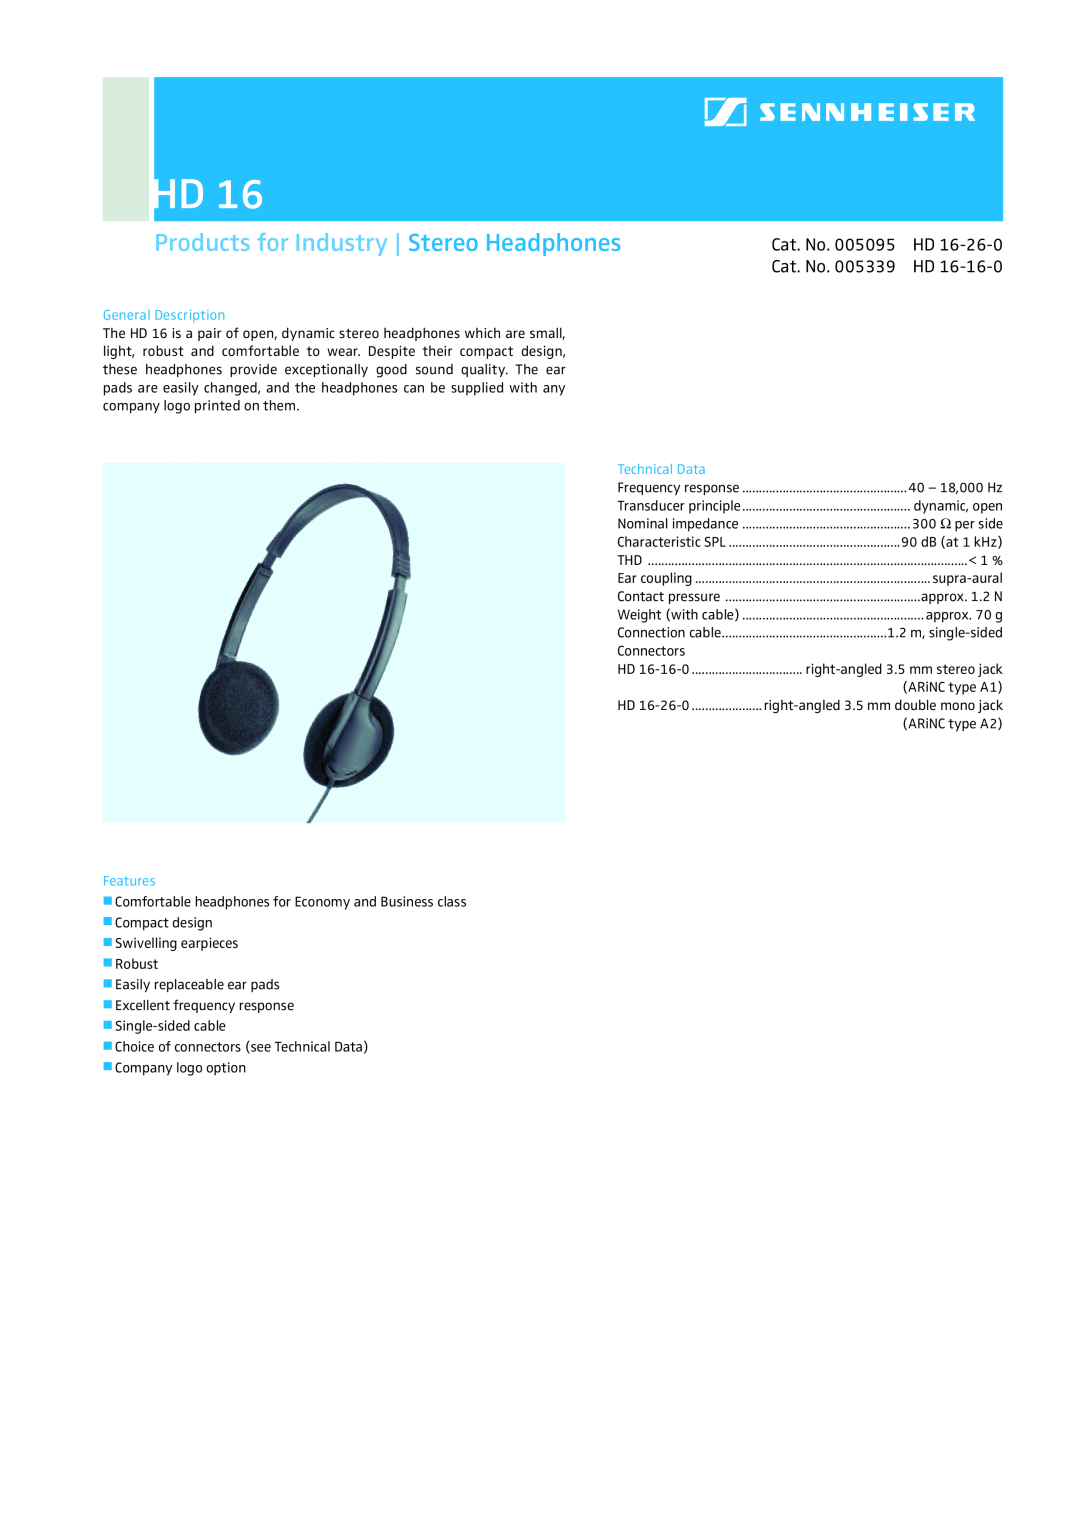 Sennheiser HD 16 manual Products for Industry | Stereo Headphones, Cat. No, General Description, Technical Data, Features 